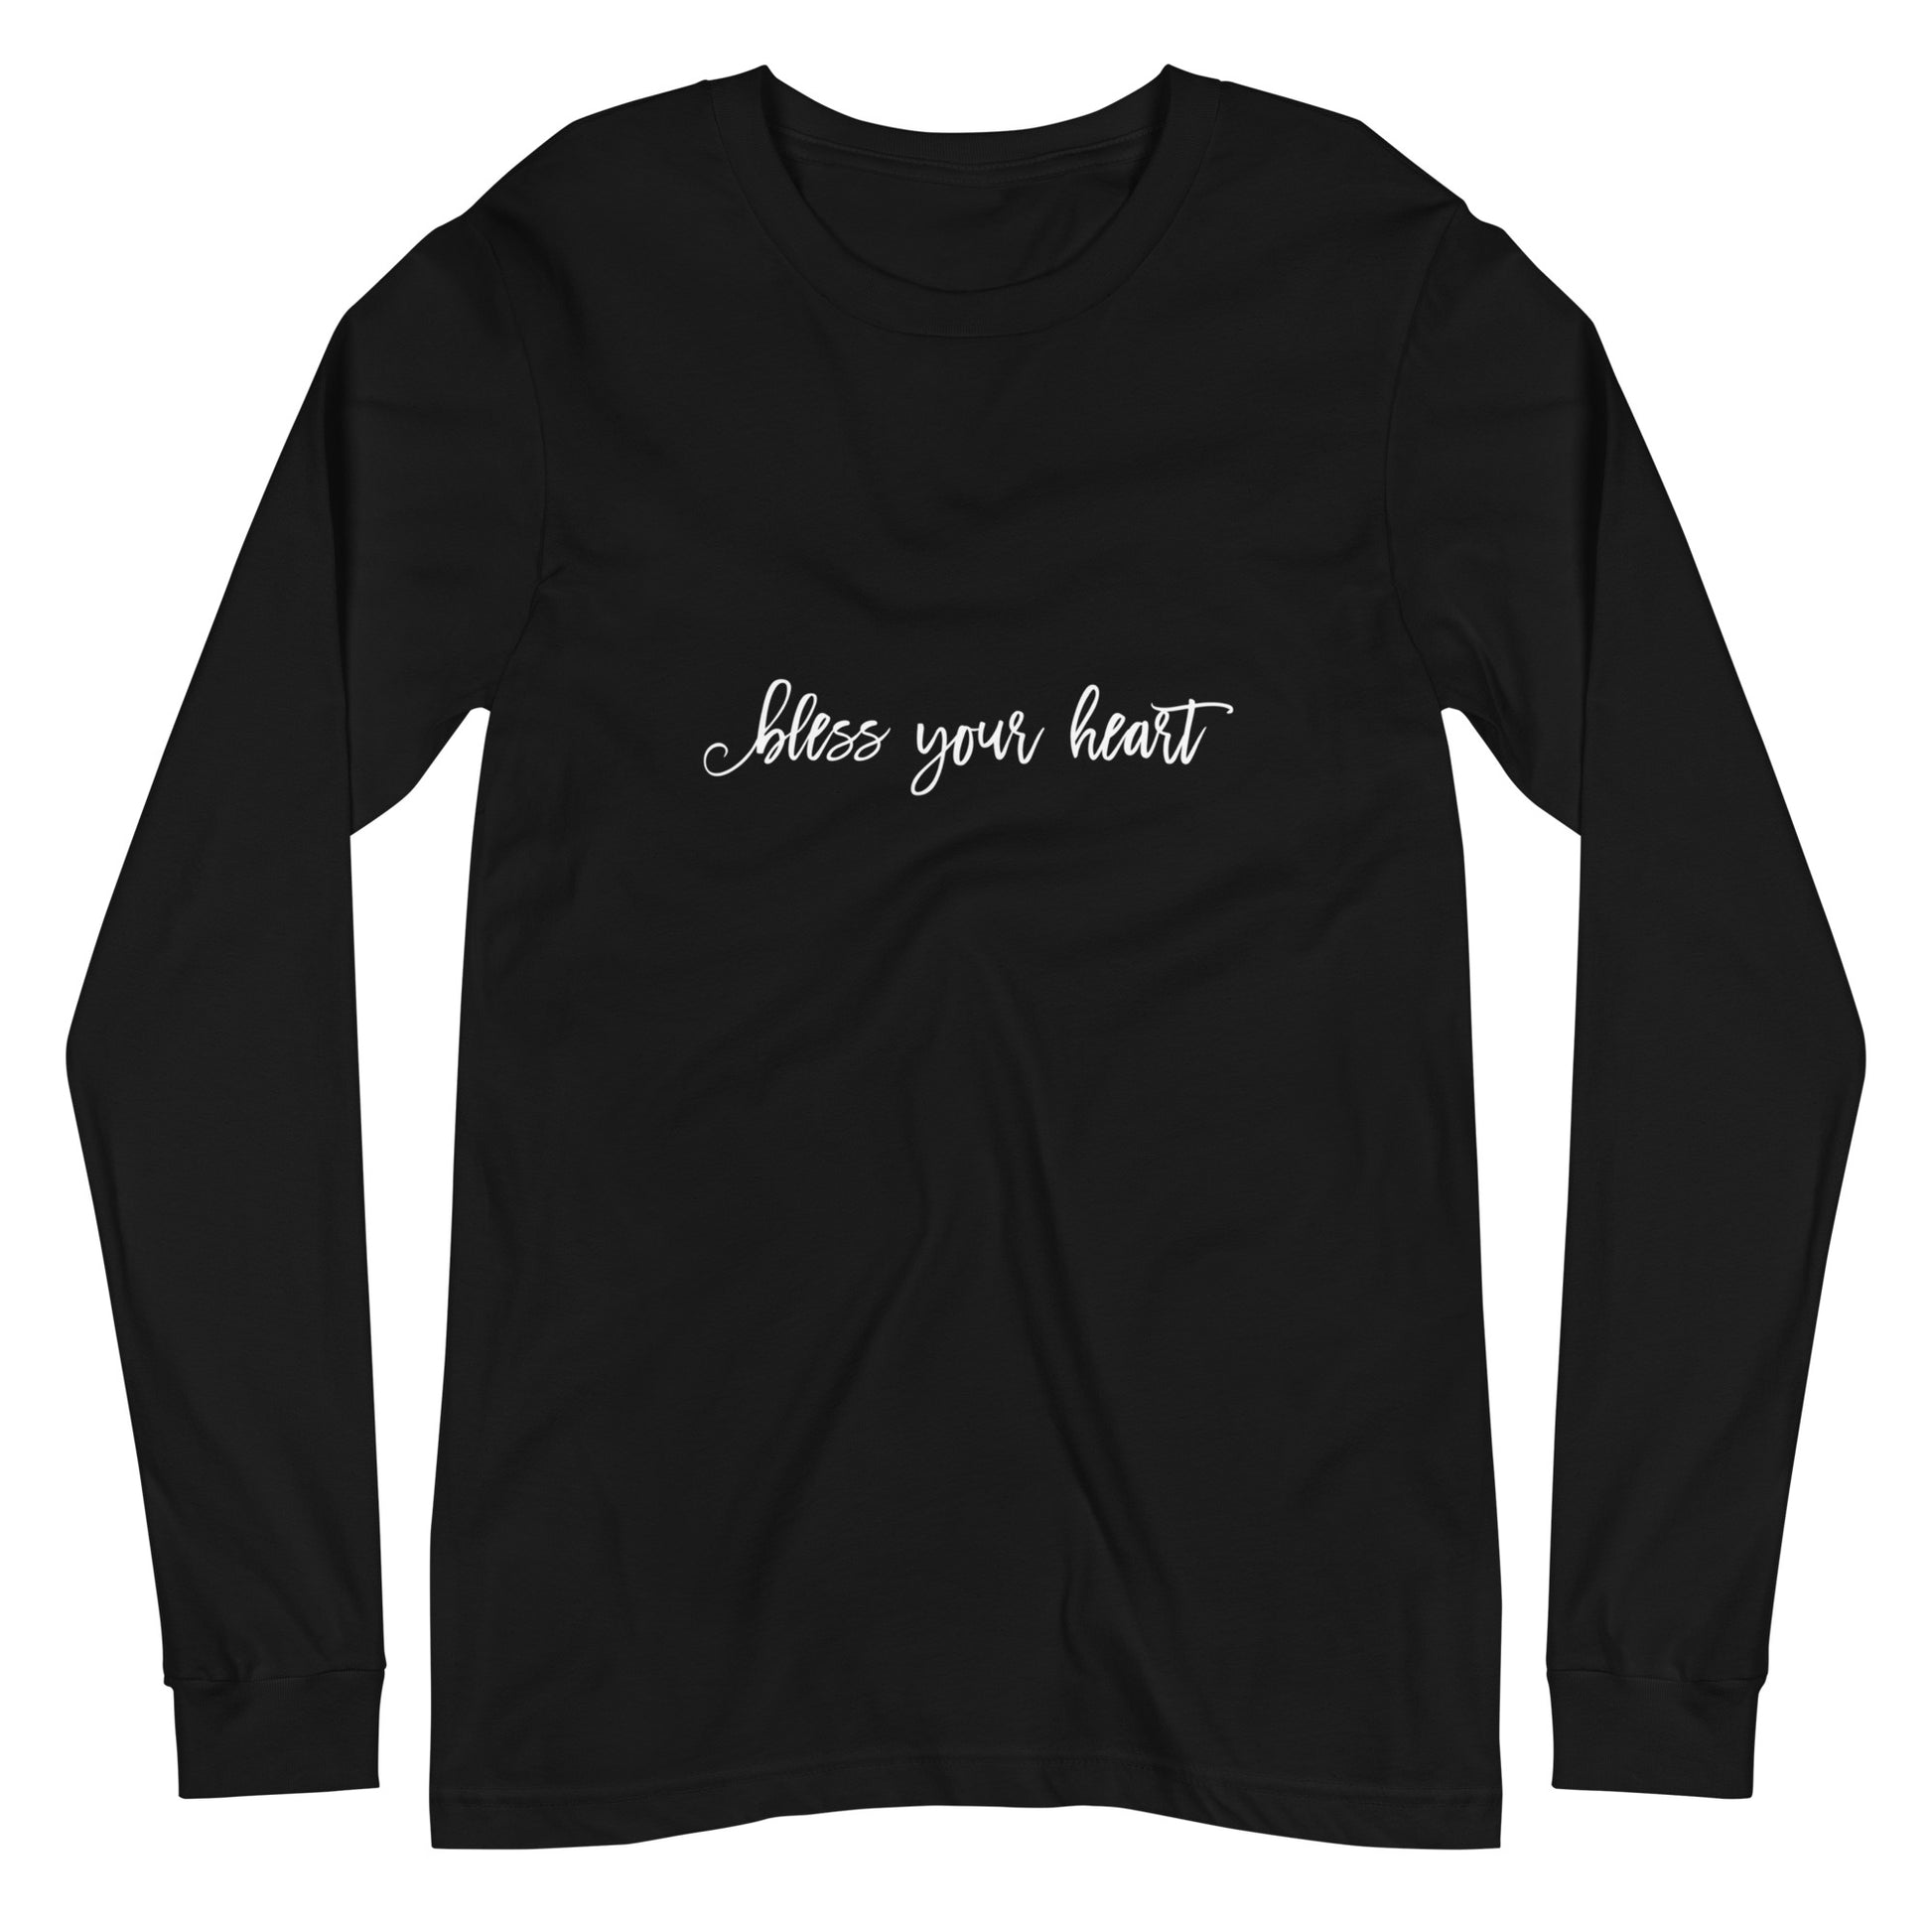 Black long-sleeve t-shirt with white graphic in an excessively twee font: "bless your heart"